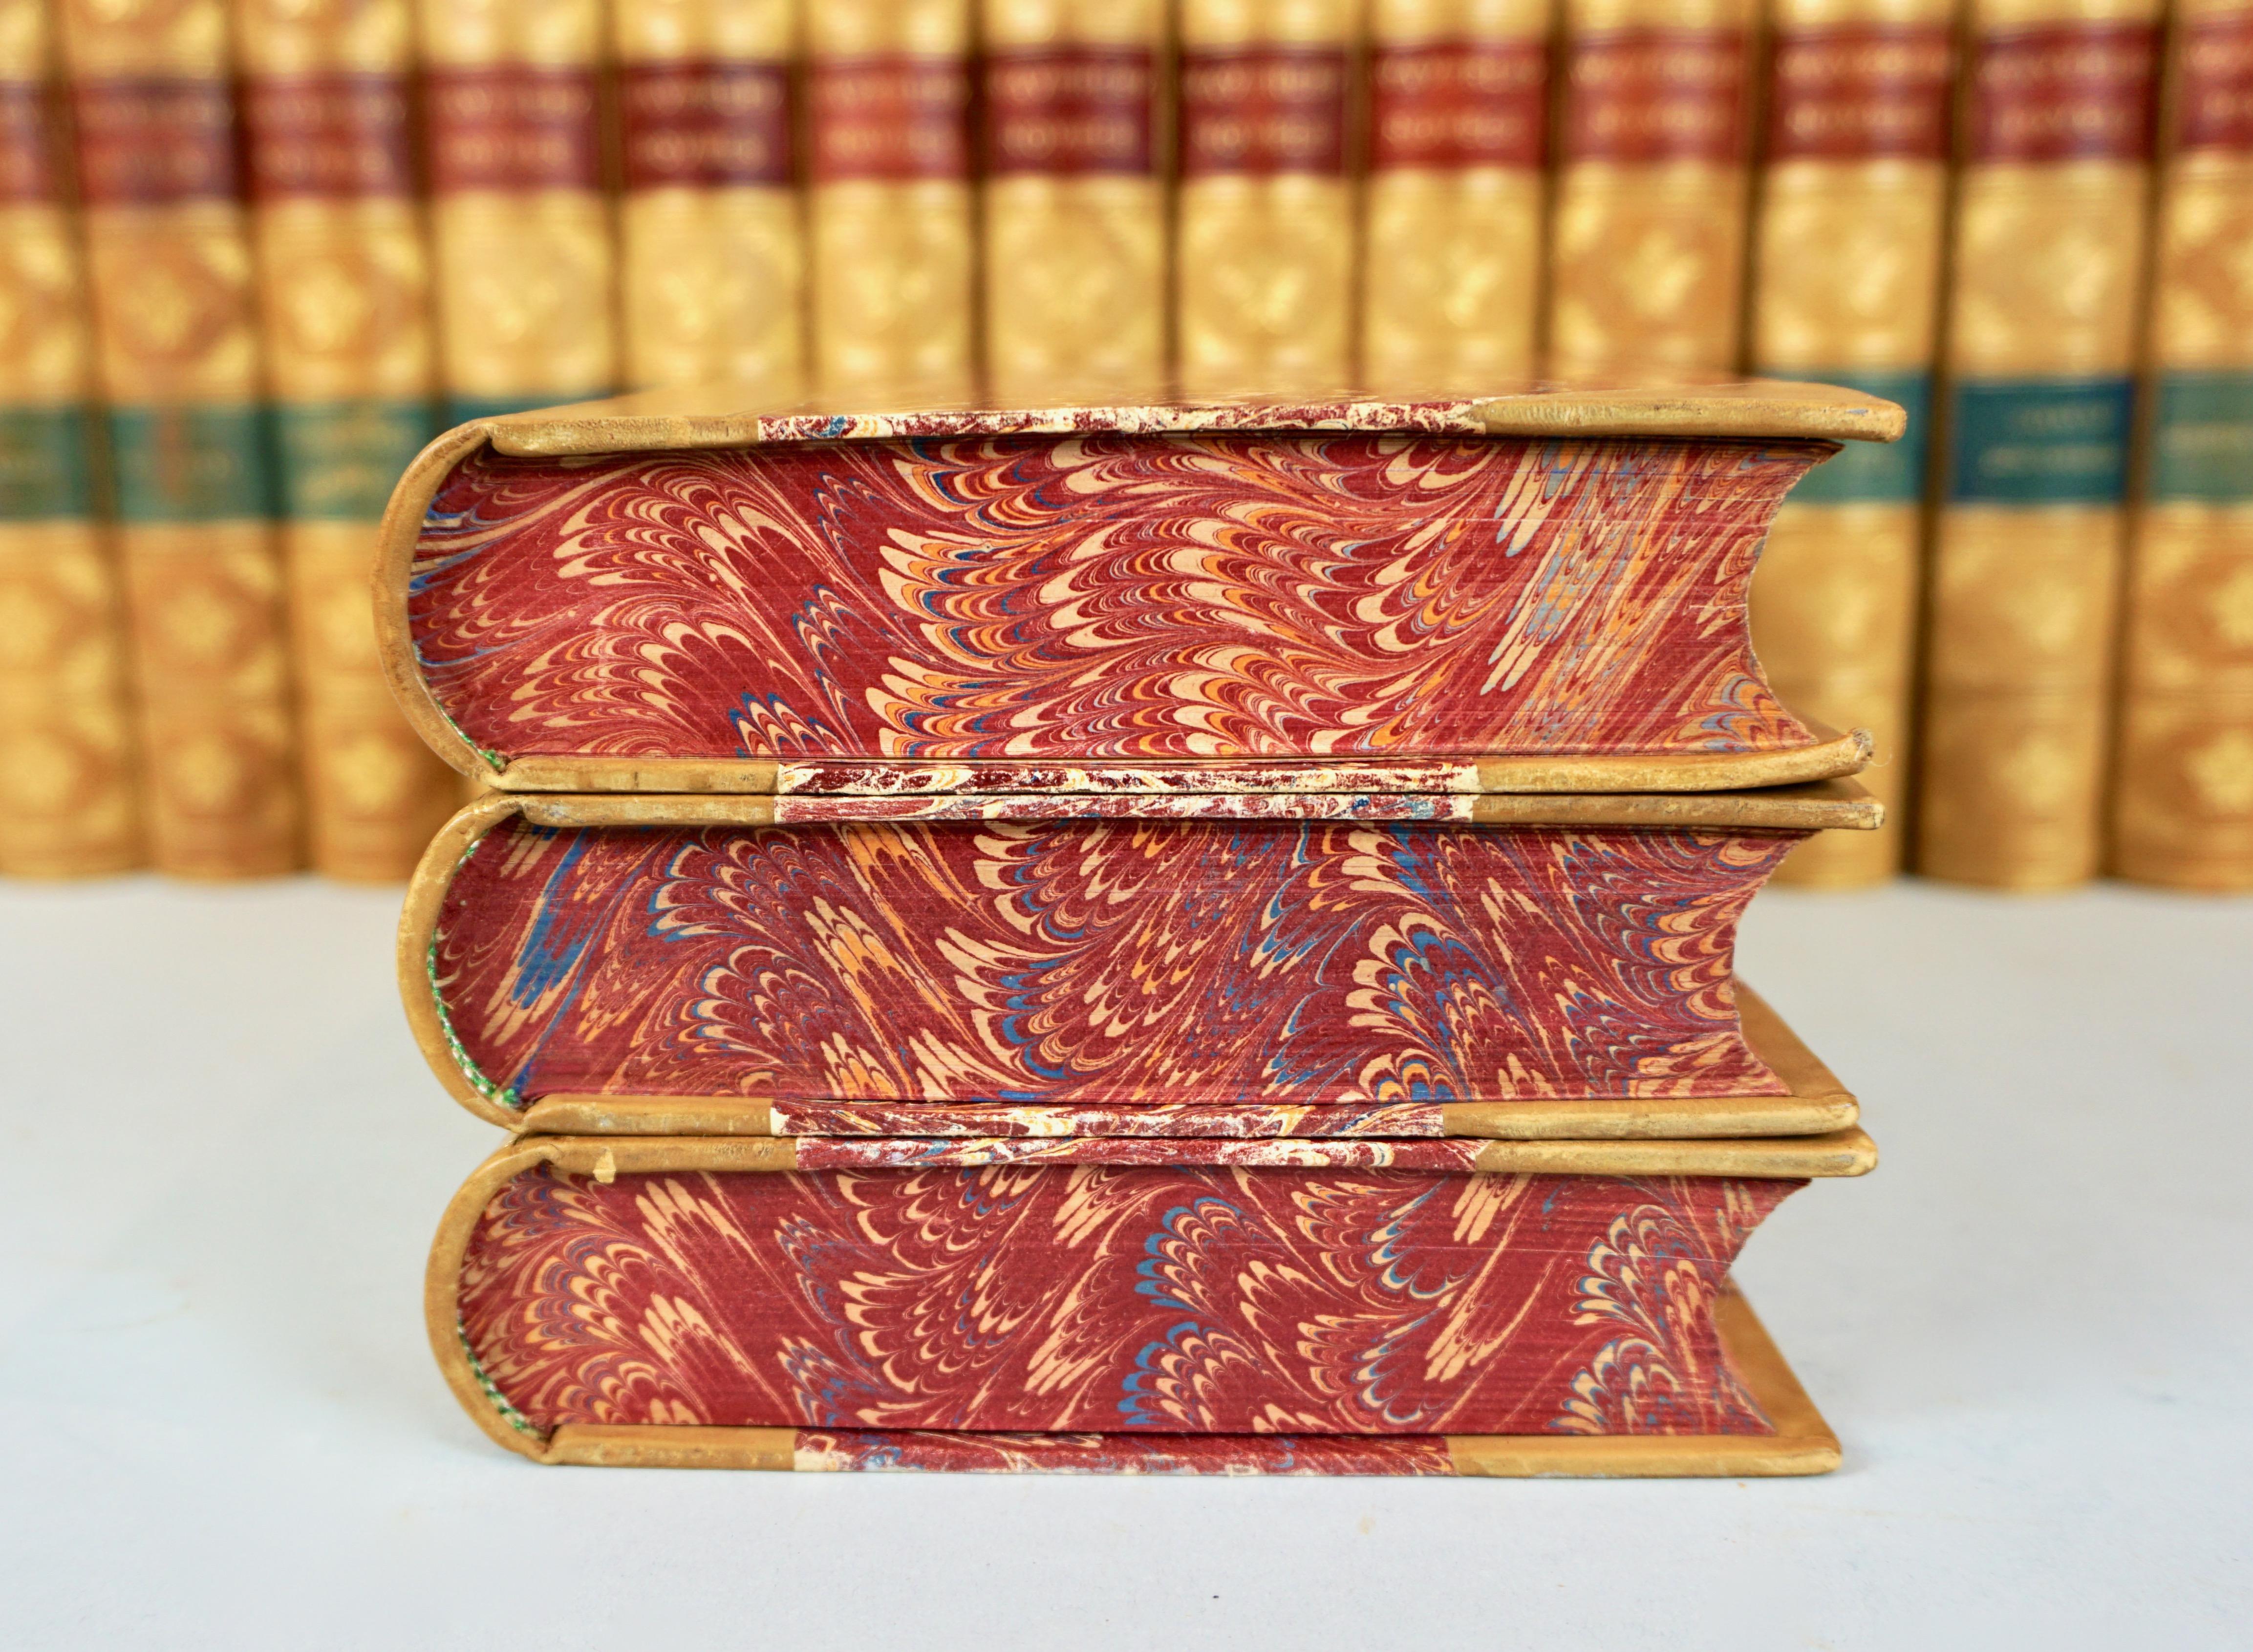 Waverly Novels 'The Works of Sir Walter Scott' in 25 Volumes Bound in Leather 4